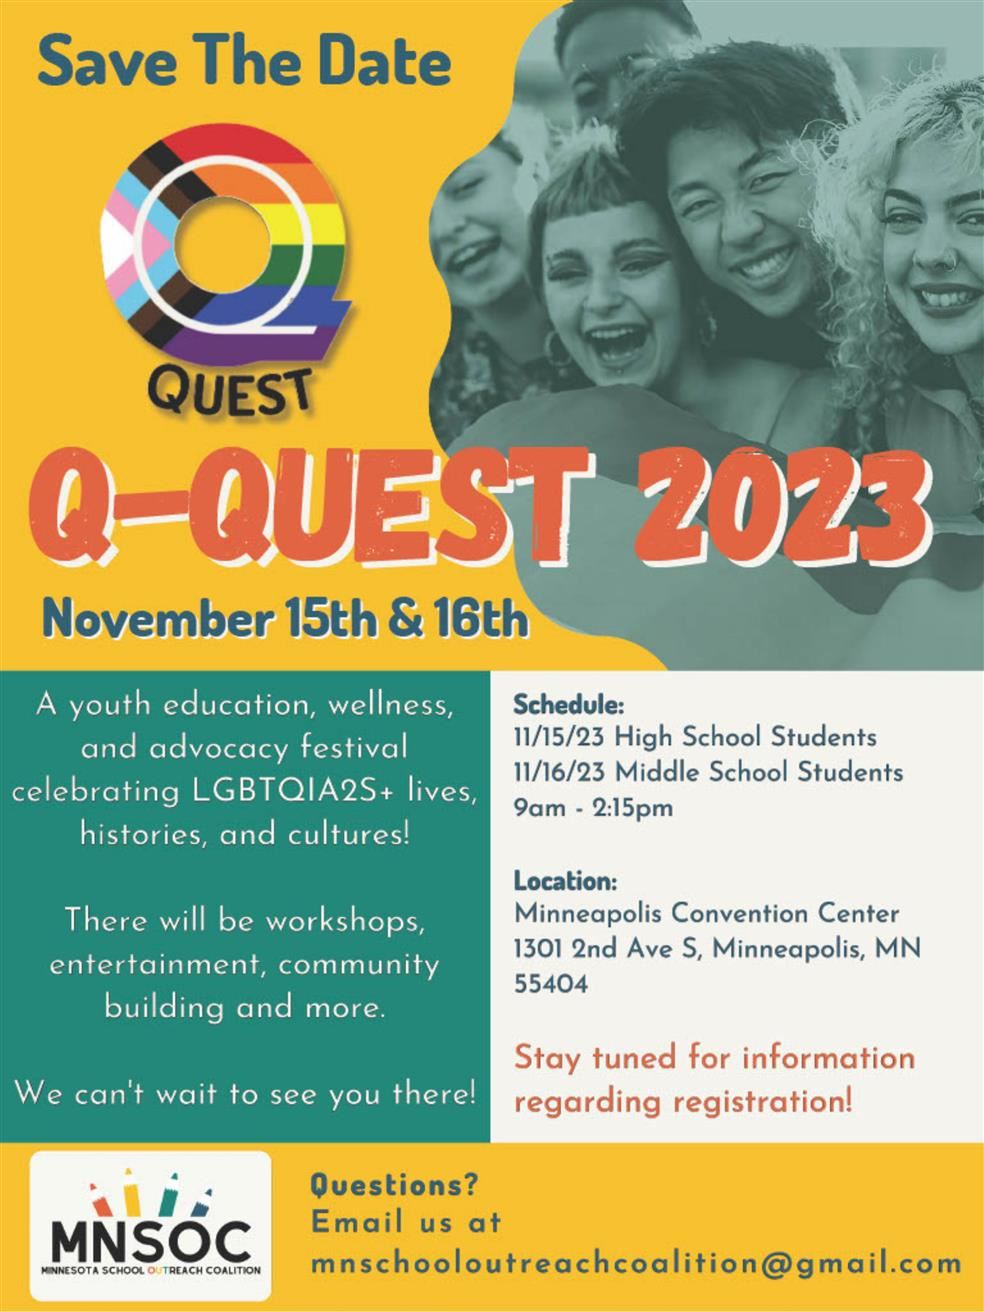  Save the Date: Q-Quest 2023 is coming!